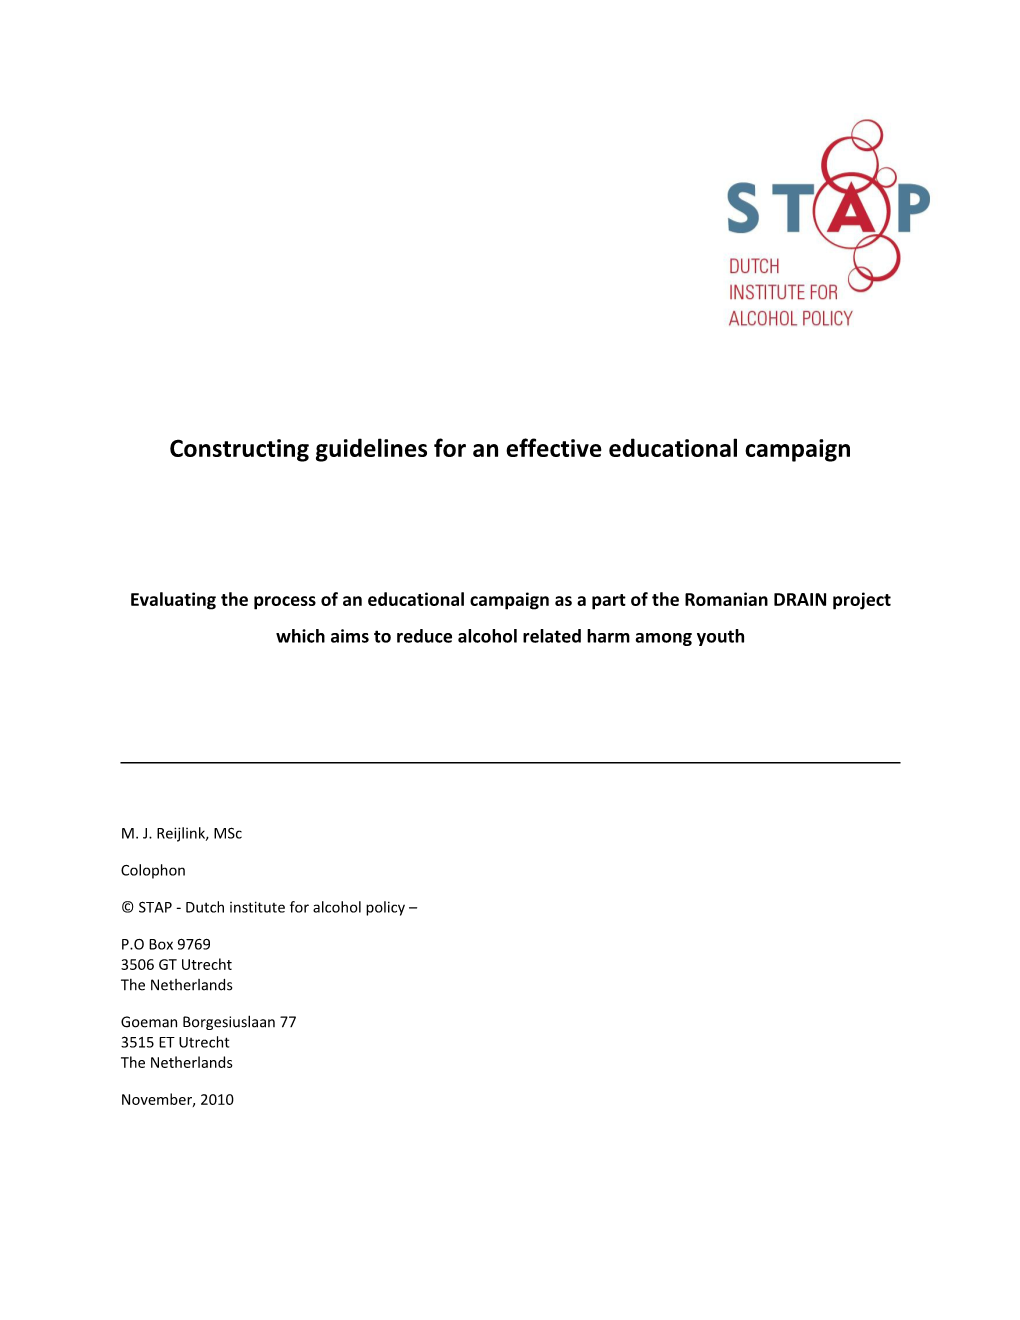 Constructing Guidelines for an Effective Educational Campaign